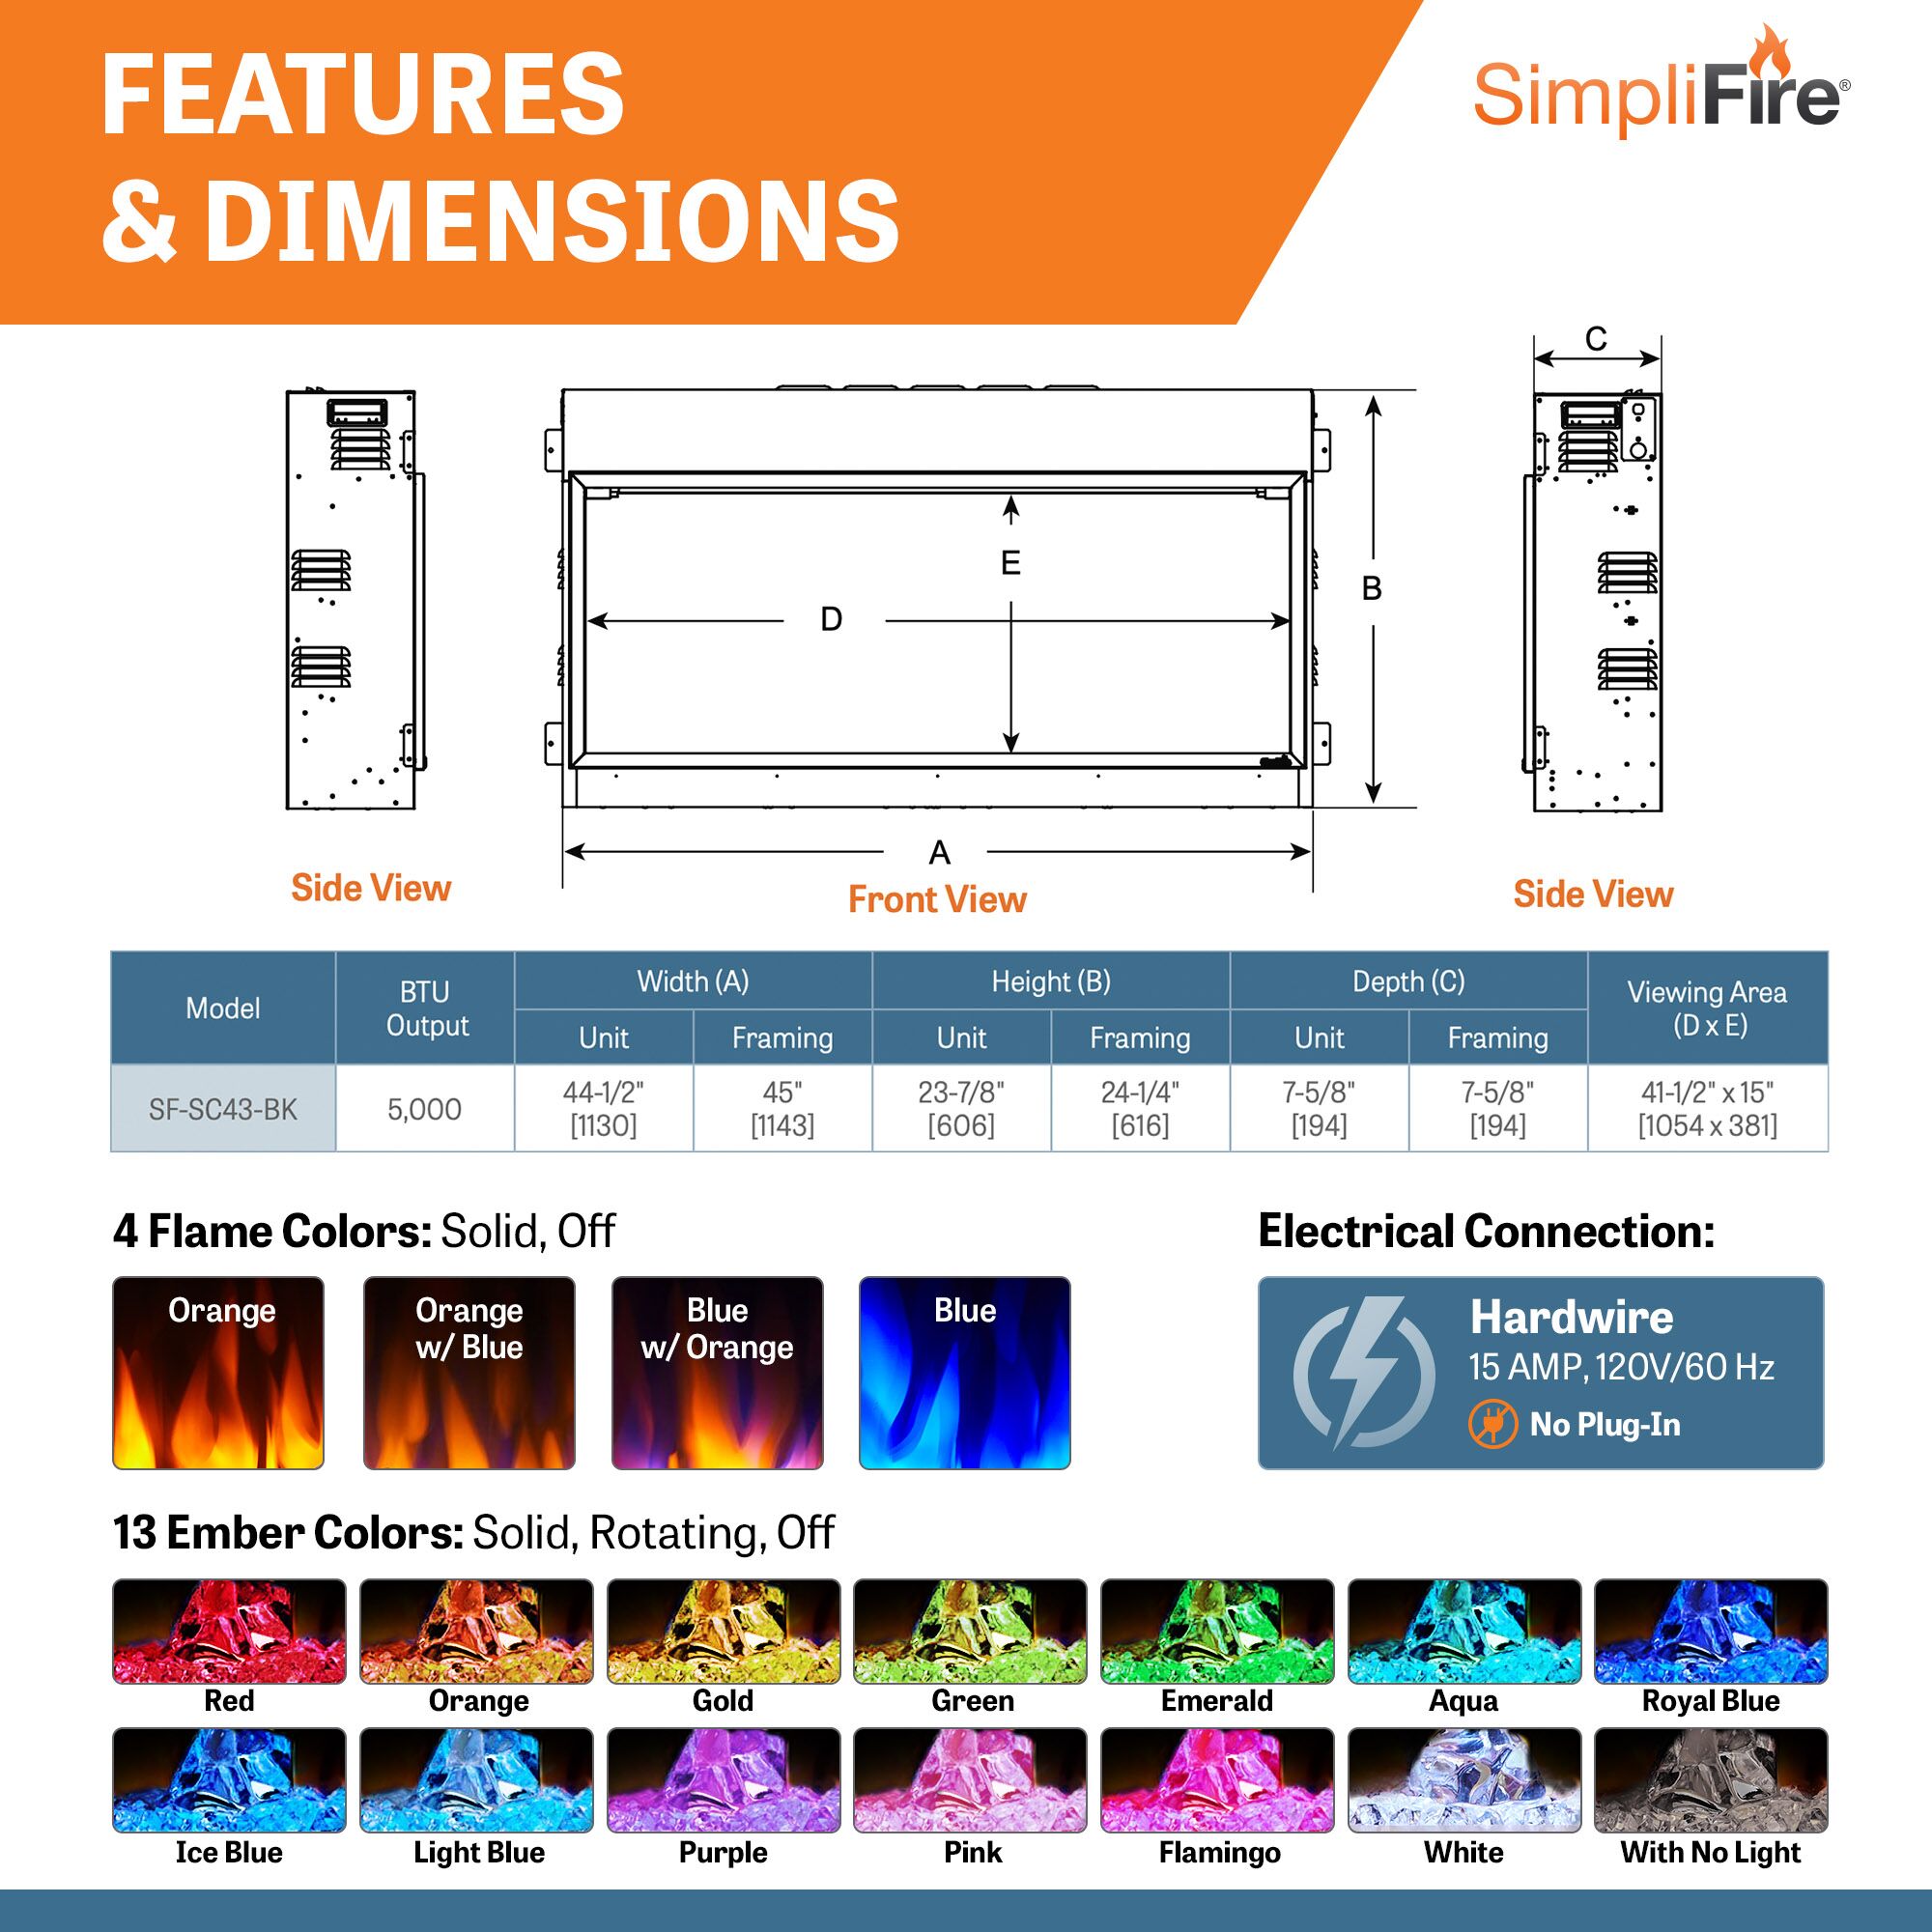 43 inch scion electric fireplace thumbnail image